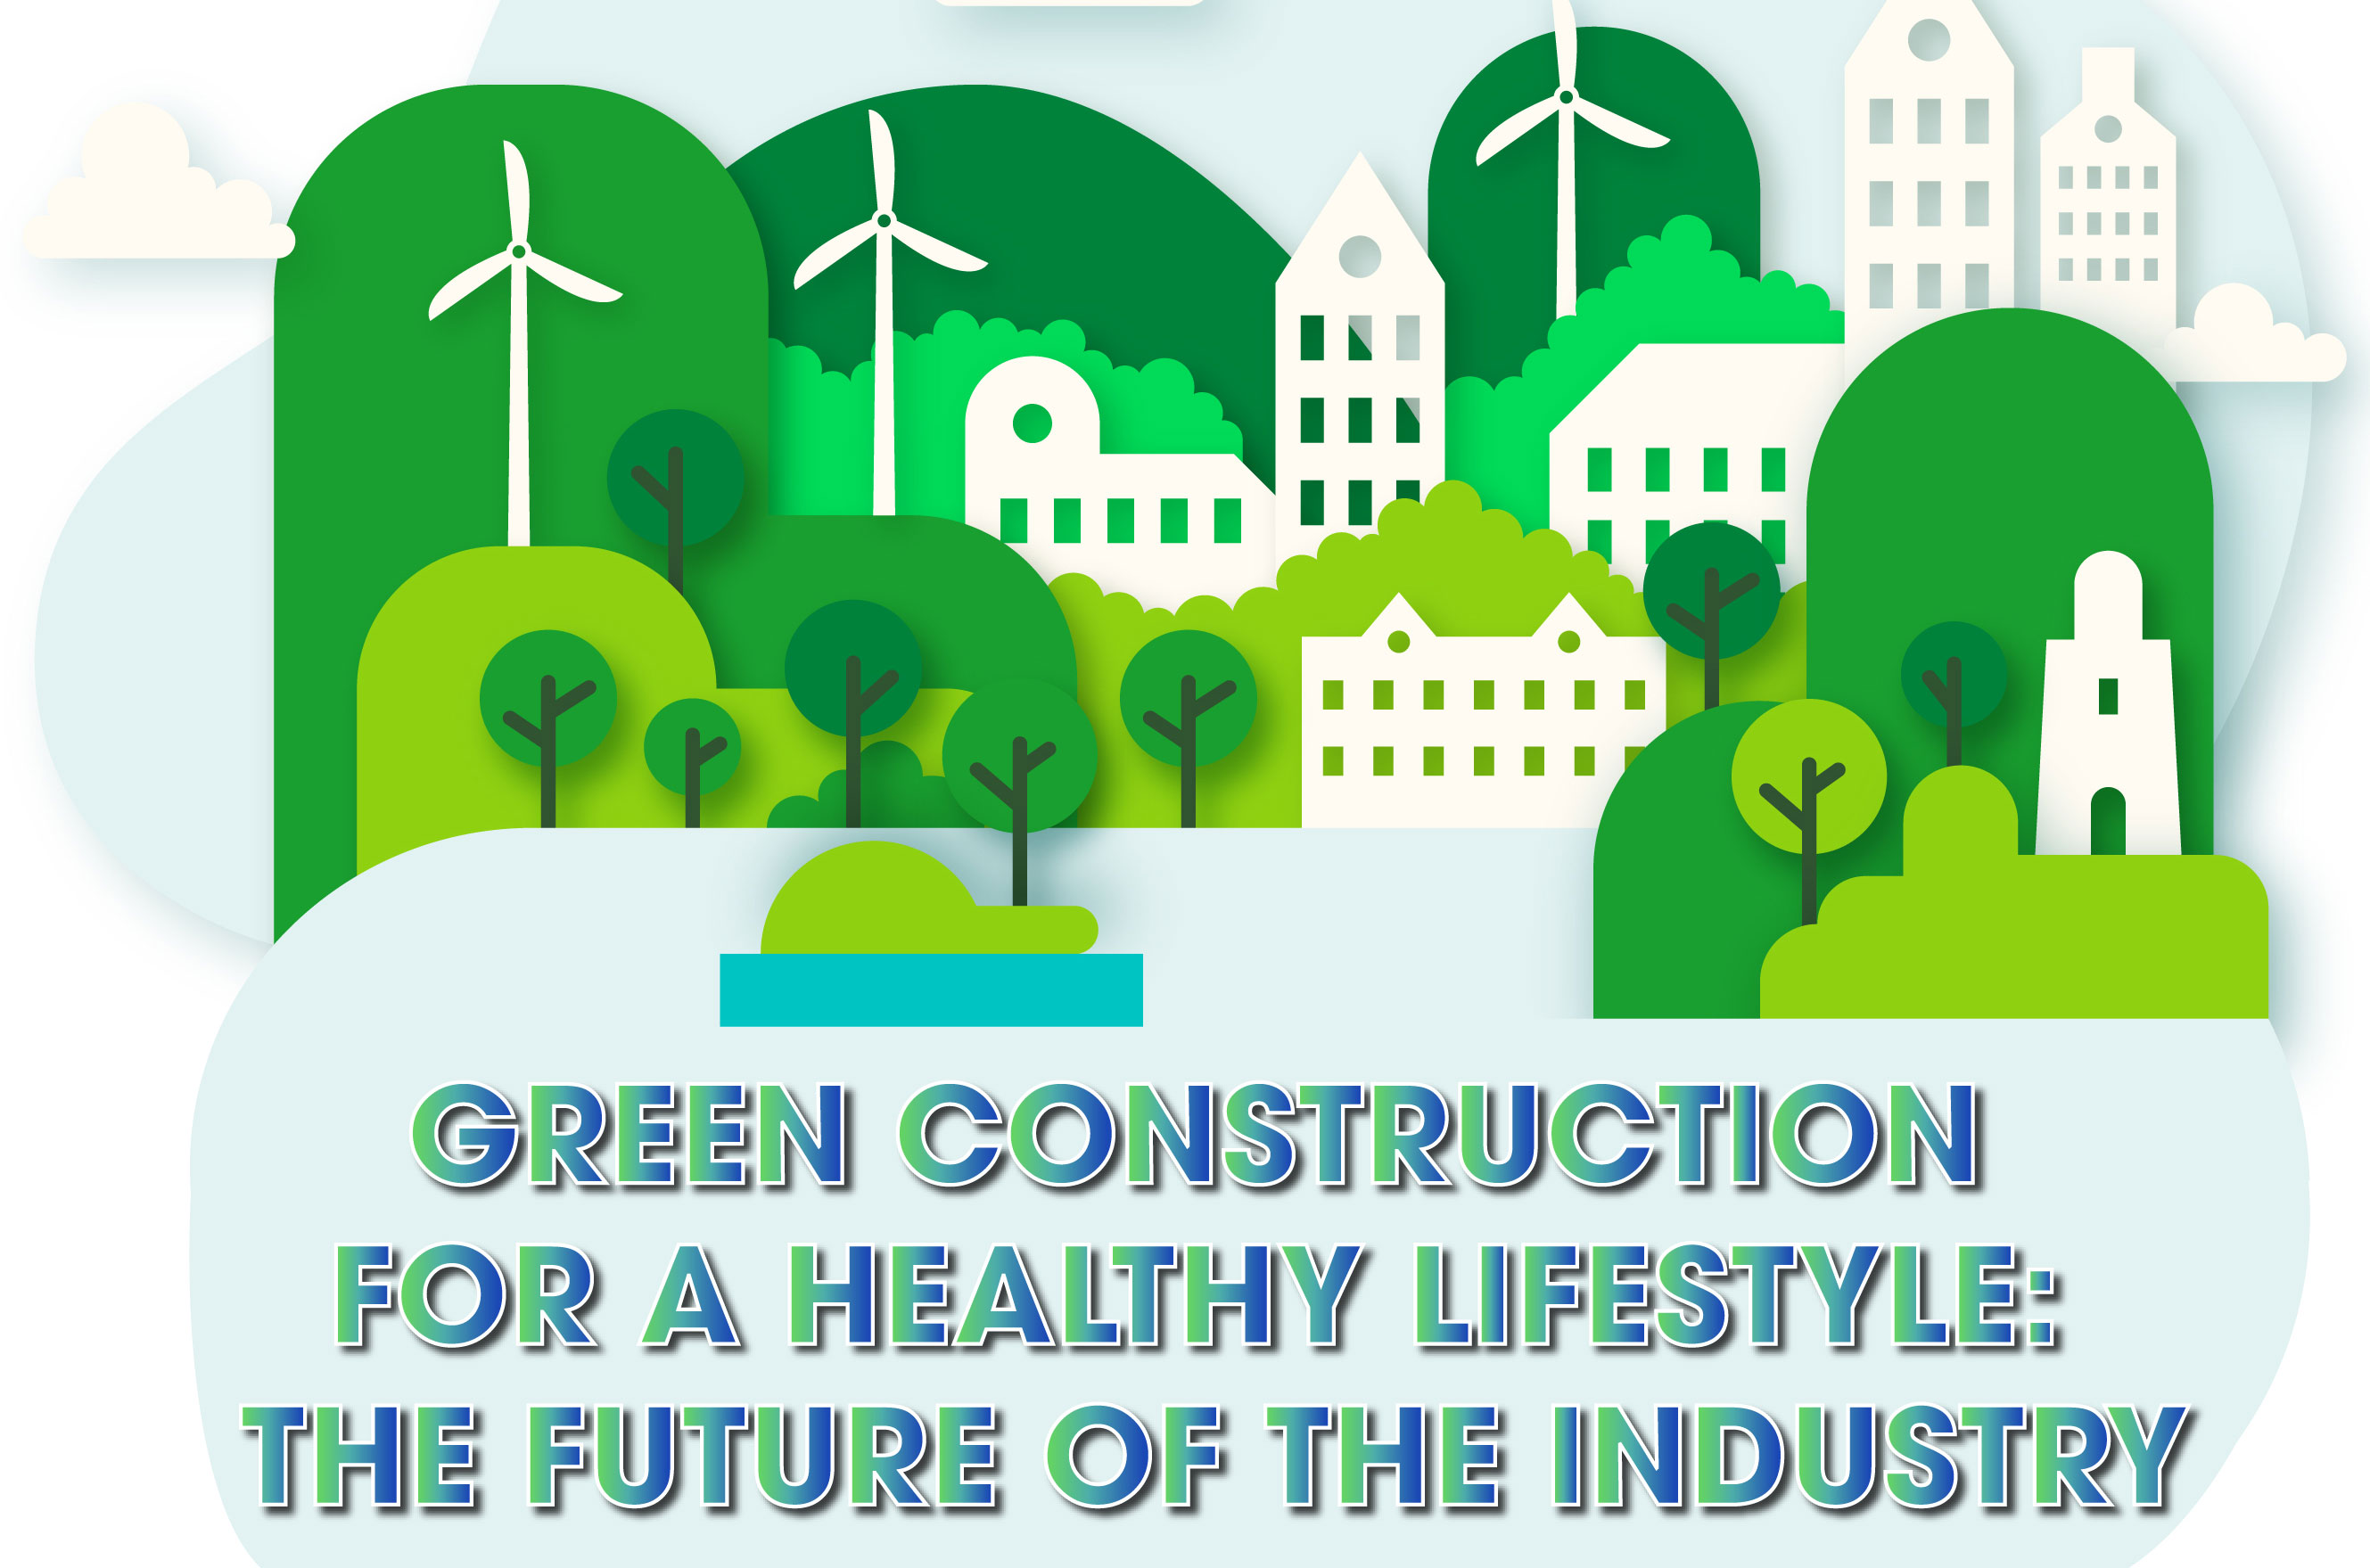 GREEN CONSTRUCTION FOR A HEALTHY LIFESTYLE: THE FUTURE OF THE INDUSTRY